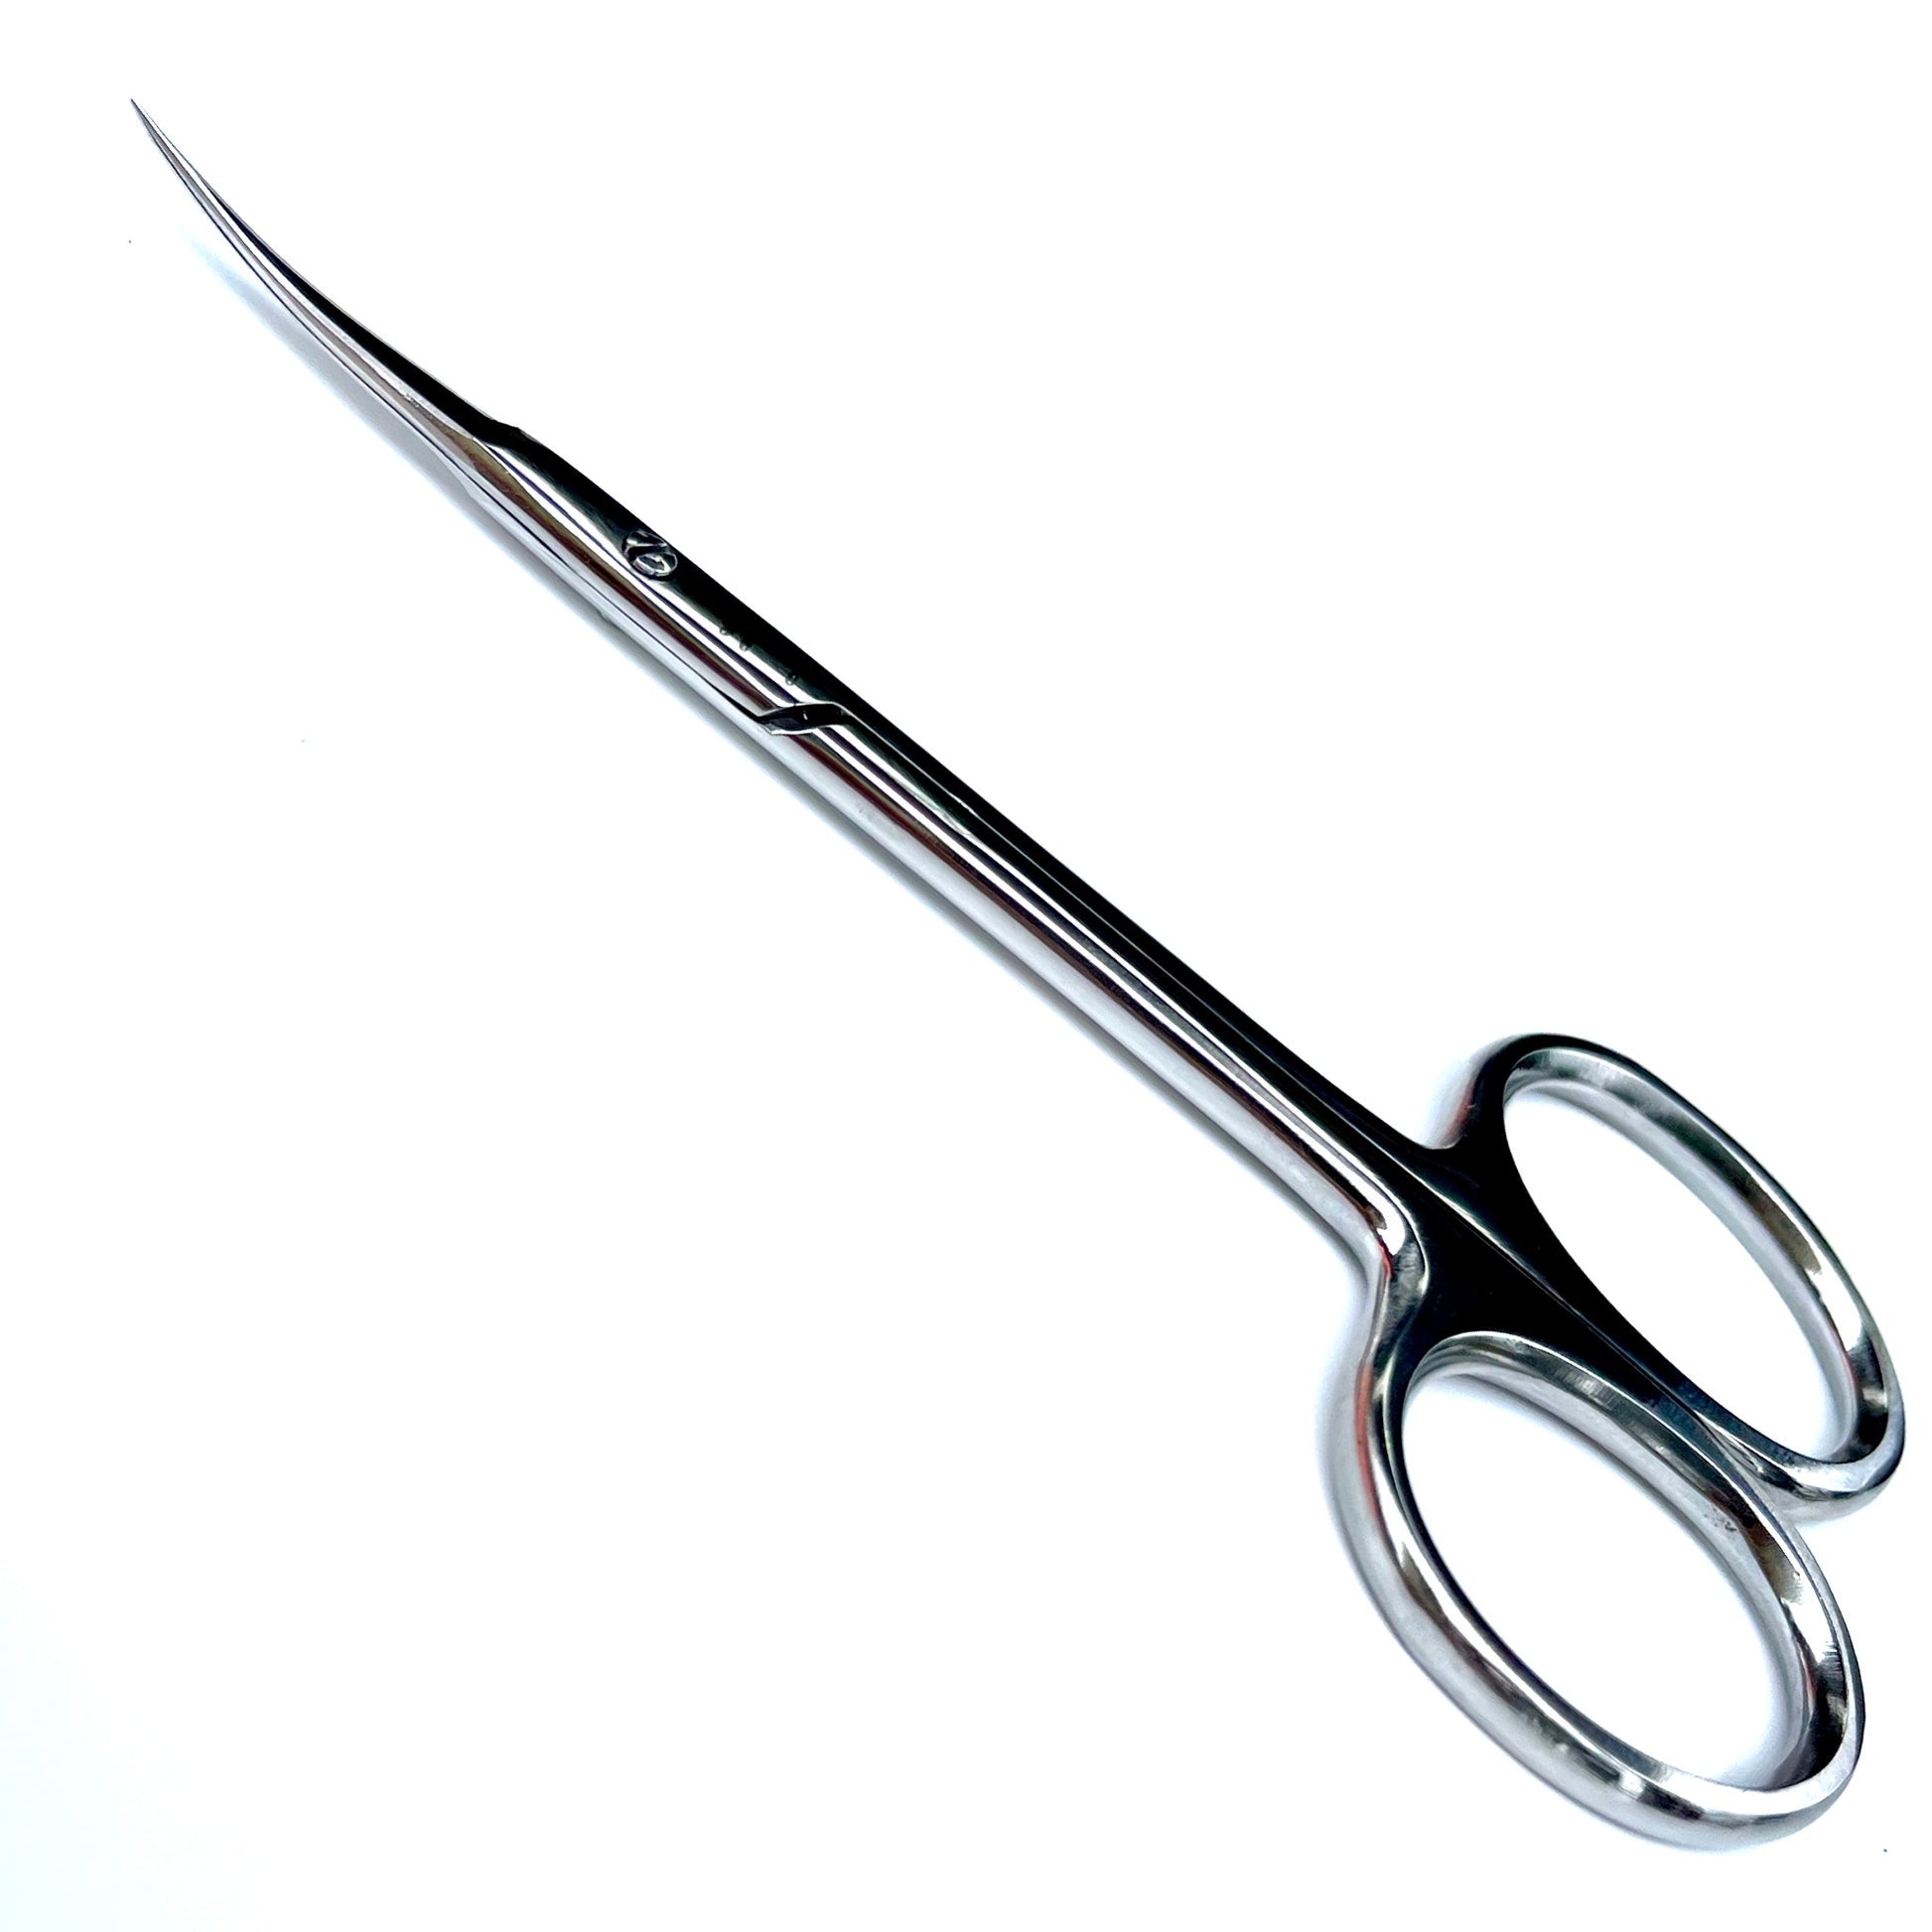 Cuticle scissors stainless steel